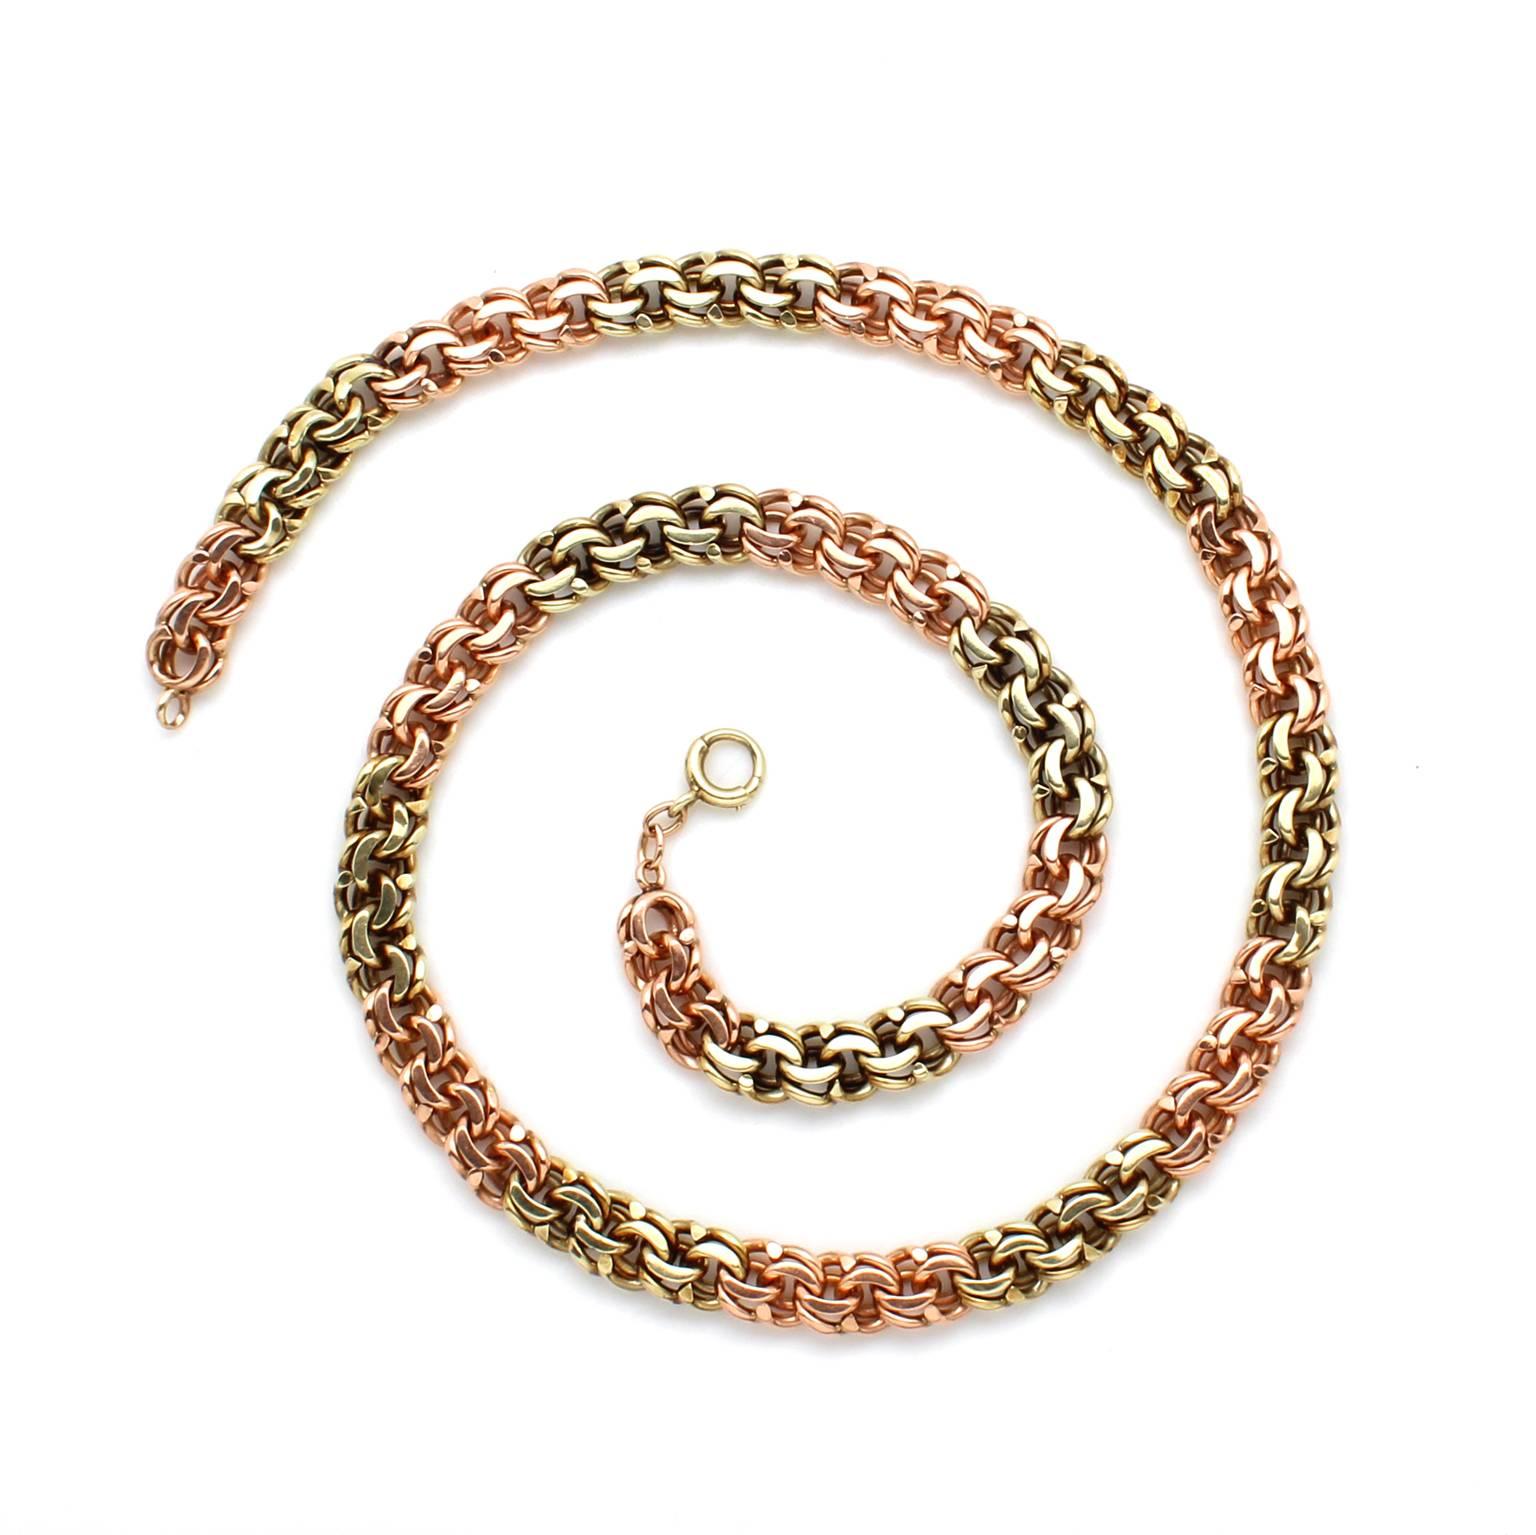 This vintage fancy link chain, circa 1940's, is made of 18k rose gold and 18k green gold in alternating sections. It has a spring ring clasp and great heft. The total weight of the chain is 3.61 Troy ounces. 

When worn, the chain measures 22.5